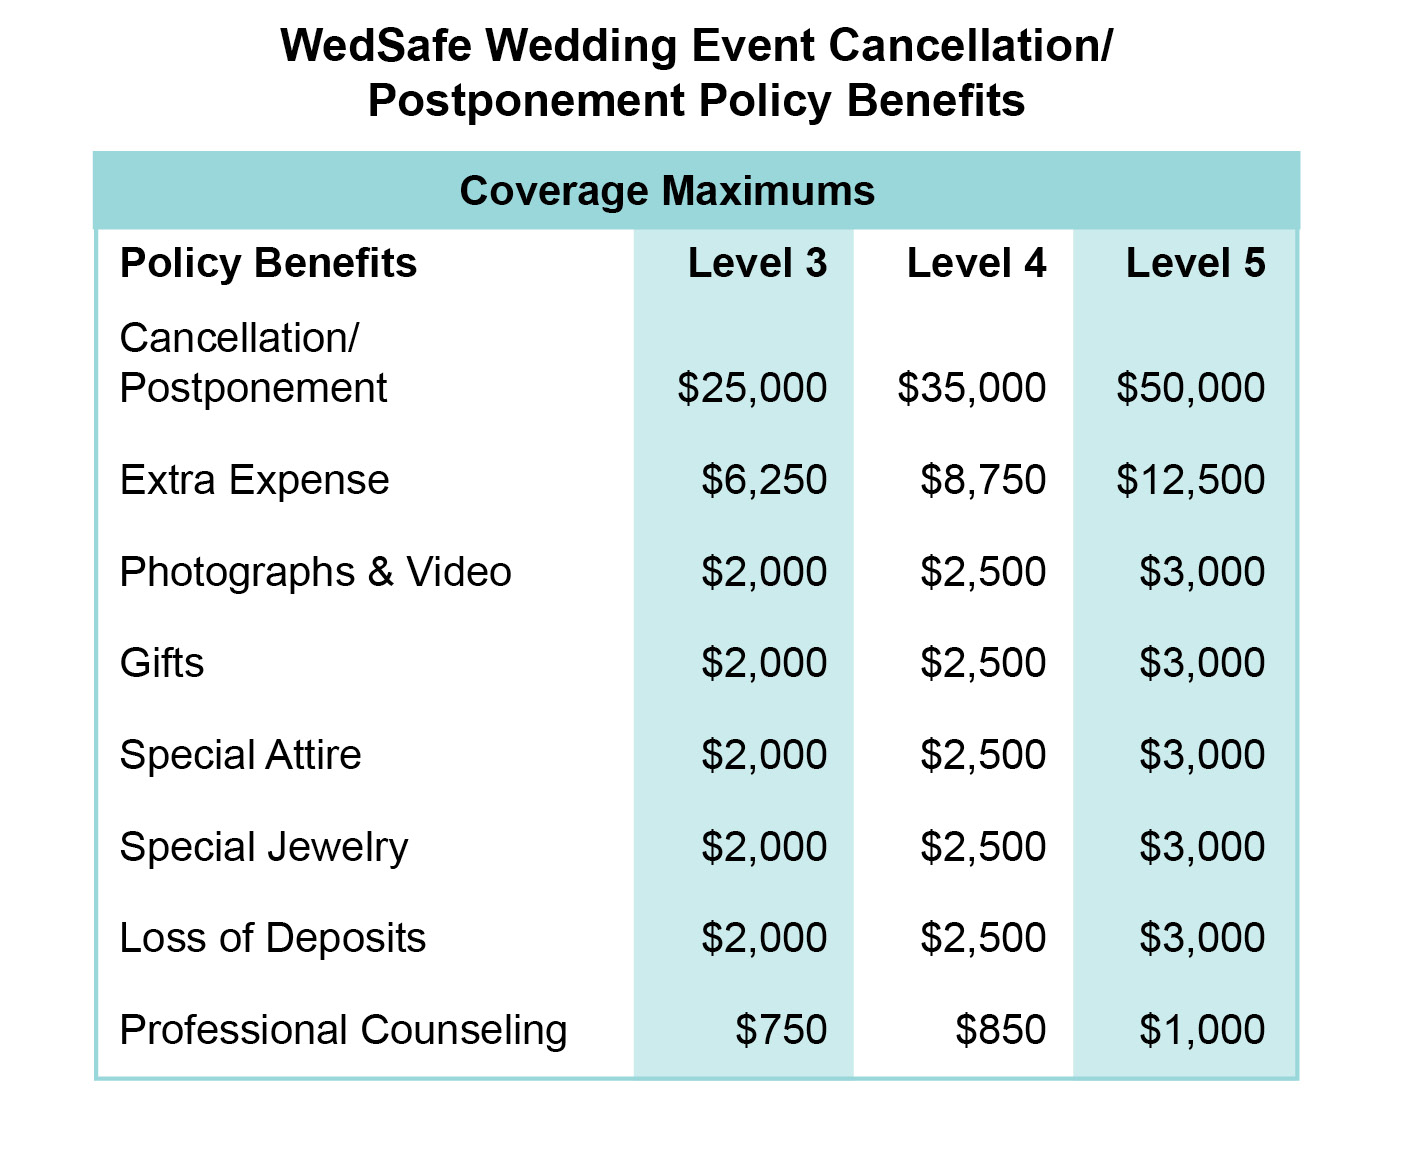 WedSafe Wedding Event Cancellation/Postponement Policy Benefits Table